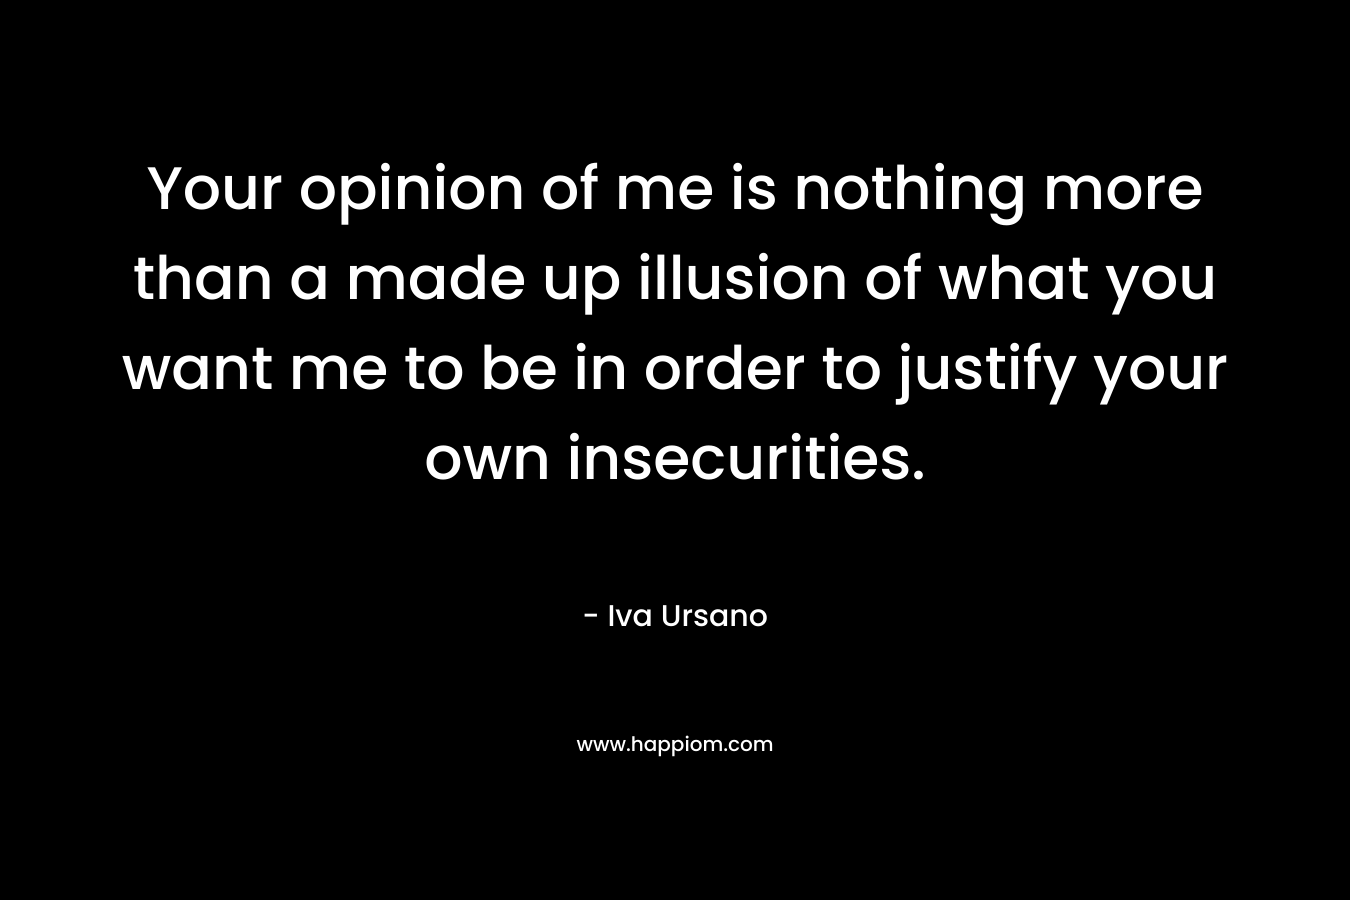 Your opinion of me is nothing more than a made up illusion of what you want me to be in order to justify your own insecurities. – Iva Ursano